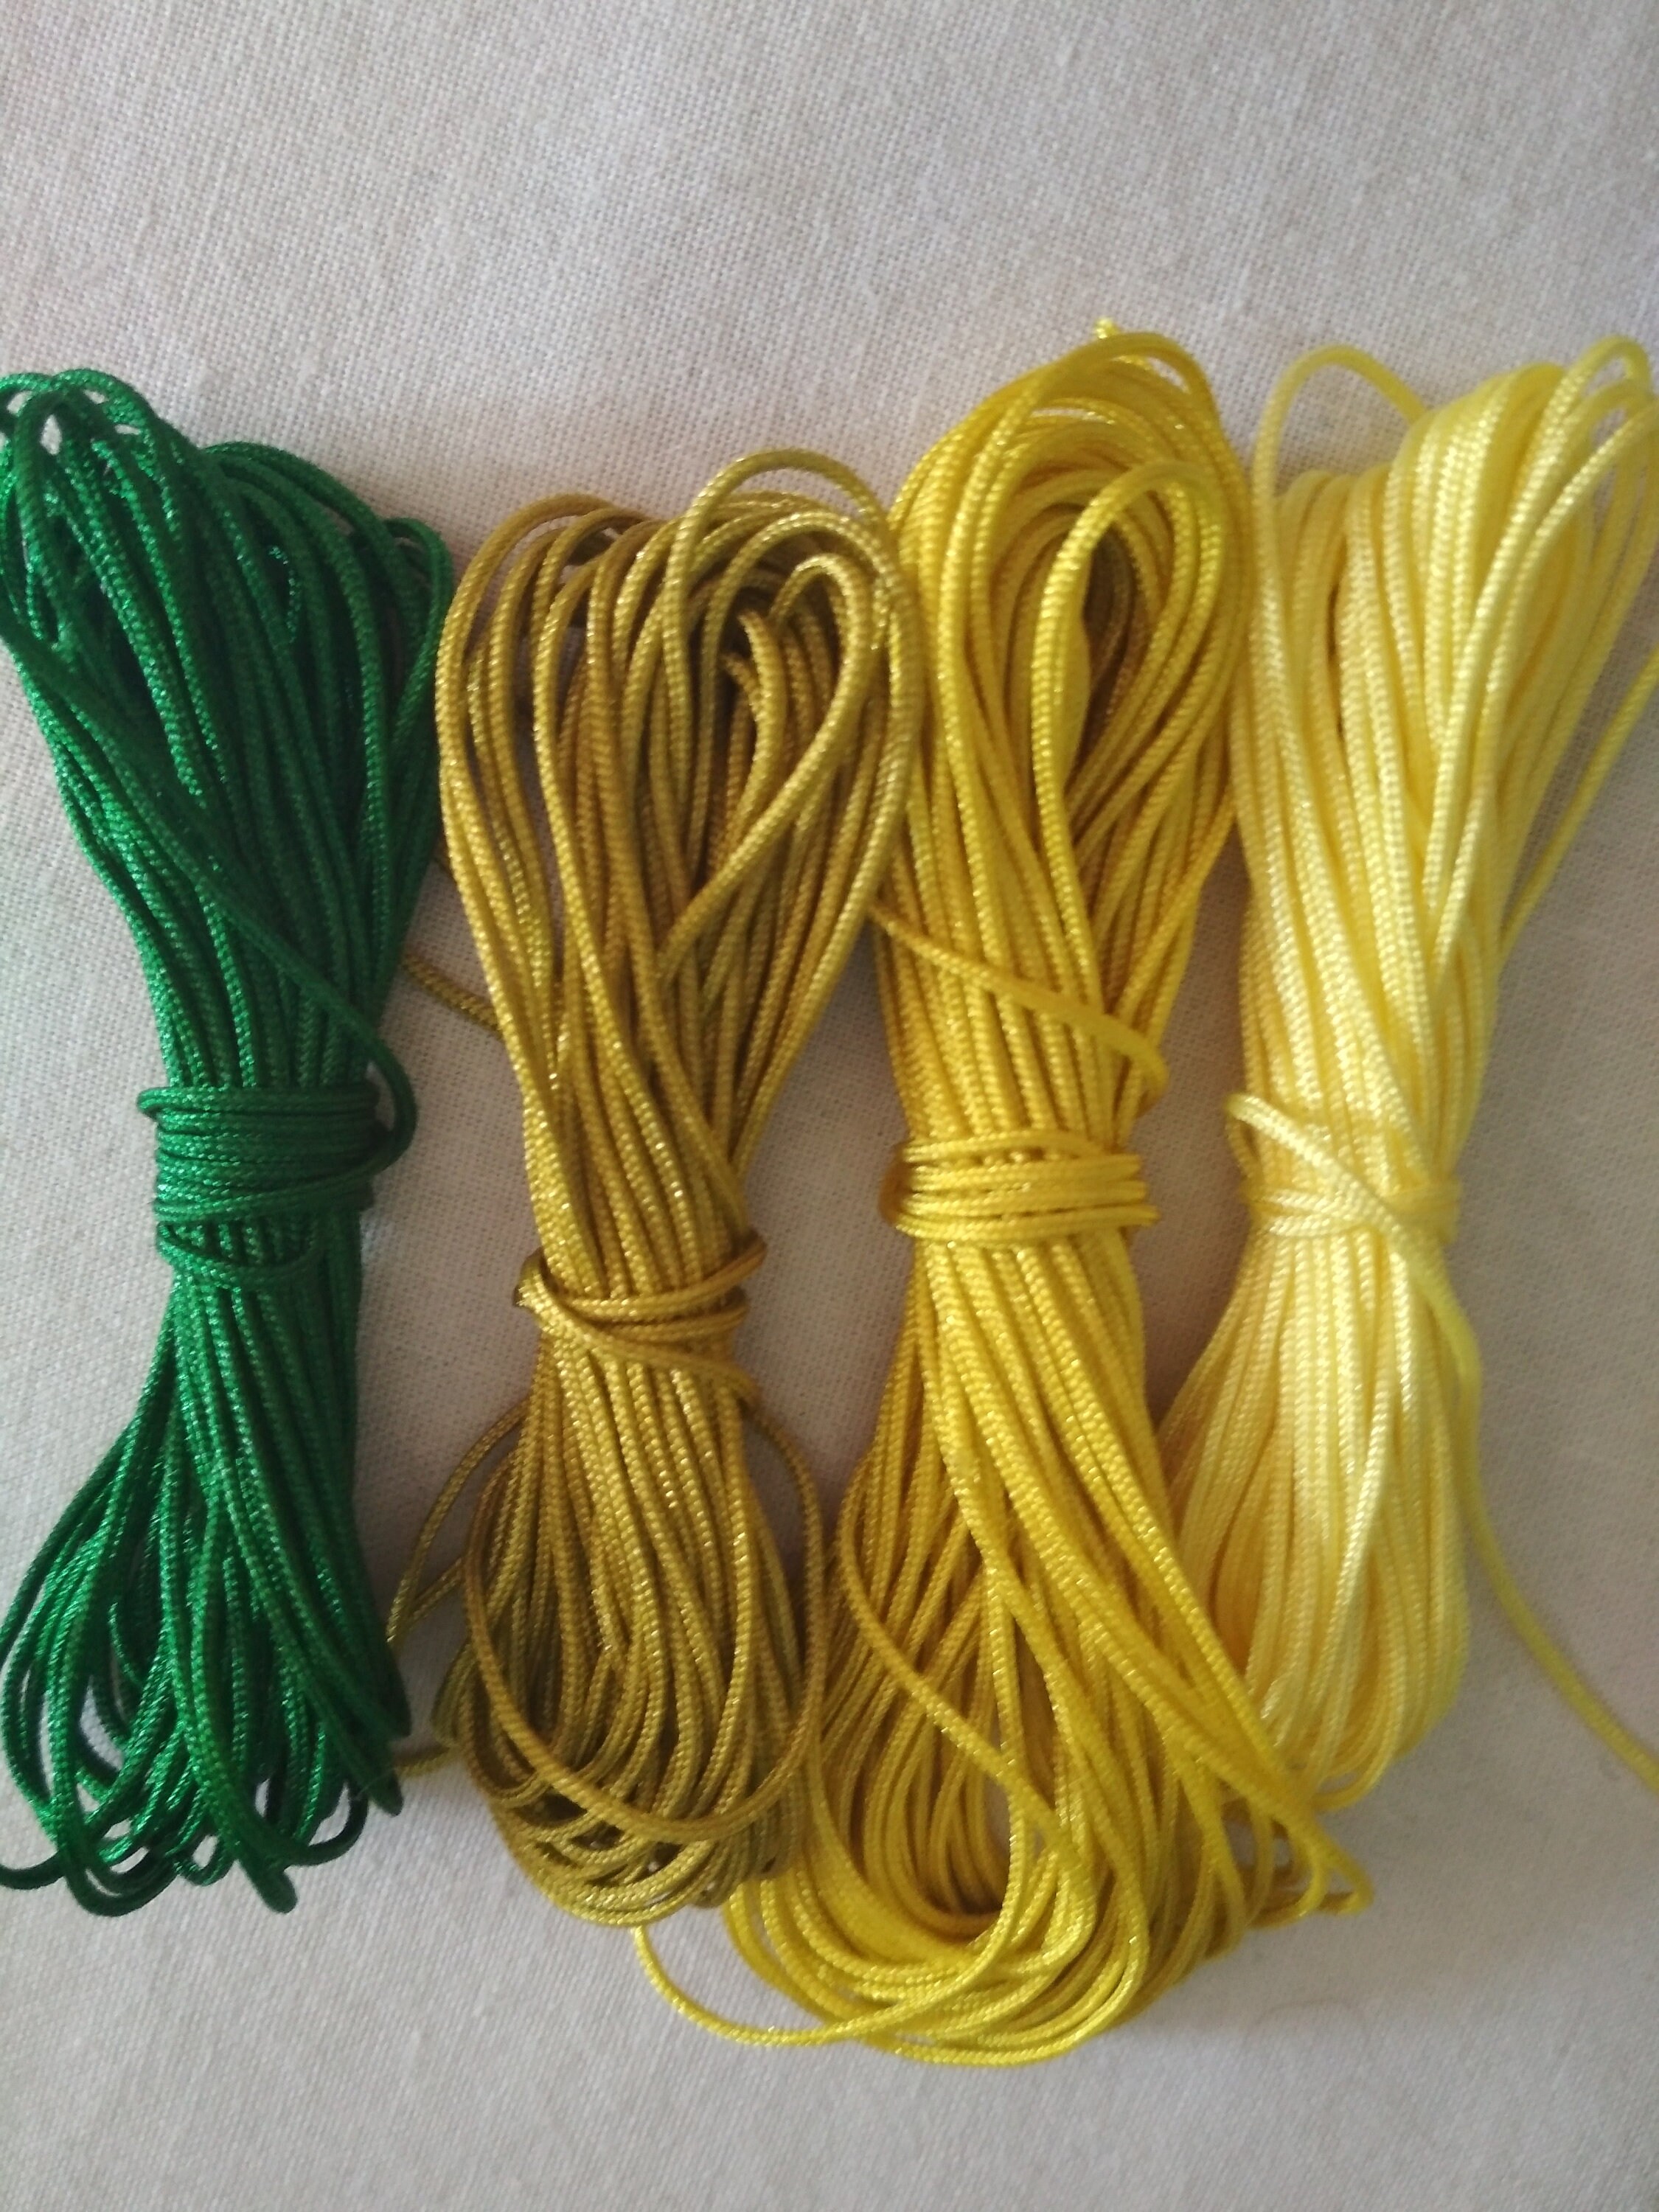 Ananta Braided/Knitted Nylon(3mm,50Mtr.)Macrame PP Knot Thread and Beading Cord  Rope. - Braided/Knitted Nylon(3mm,50Mtr.)Macrame PP Knot Thread and Beading Cord  Rope. . shop for Ananta products in India.